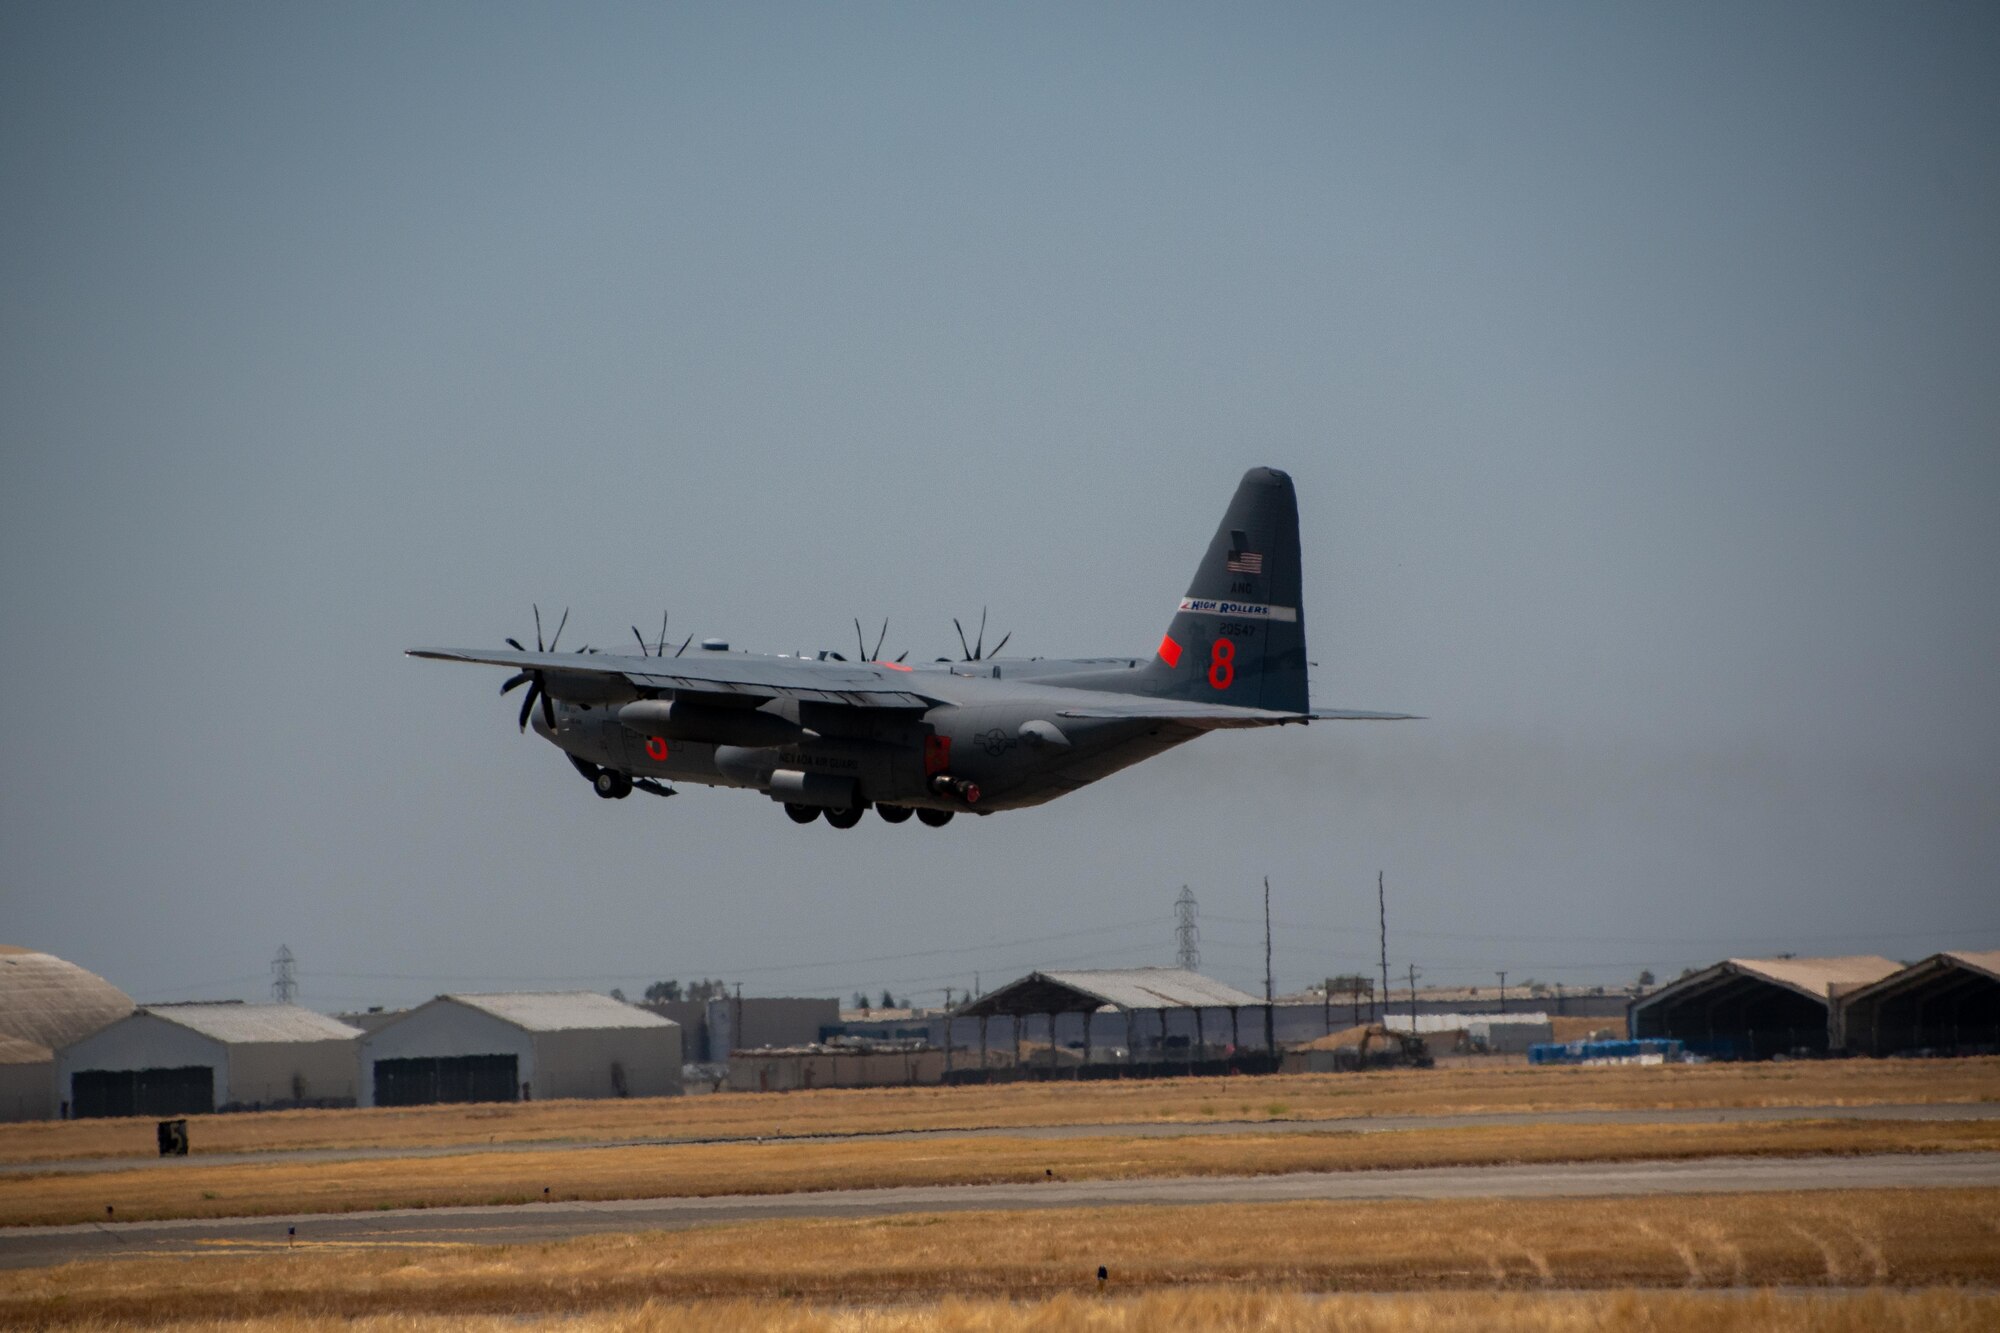 Air National Guard C-130 MAFFS 8 out of Reno, Nev., launches July 14, 2021, from CAL FIRE Air Tanker Base, McClellan Park, Calif. The Defense Department, through the commander, U.S. Northern Command (USNORTHCOM), supports the National Interagency Fire Center in fighting wildfires.